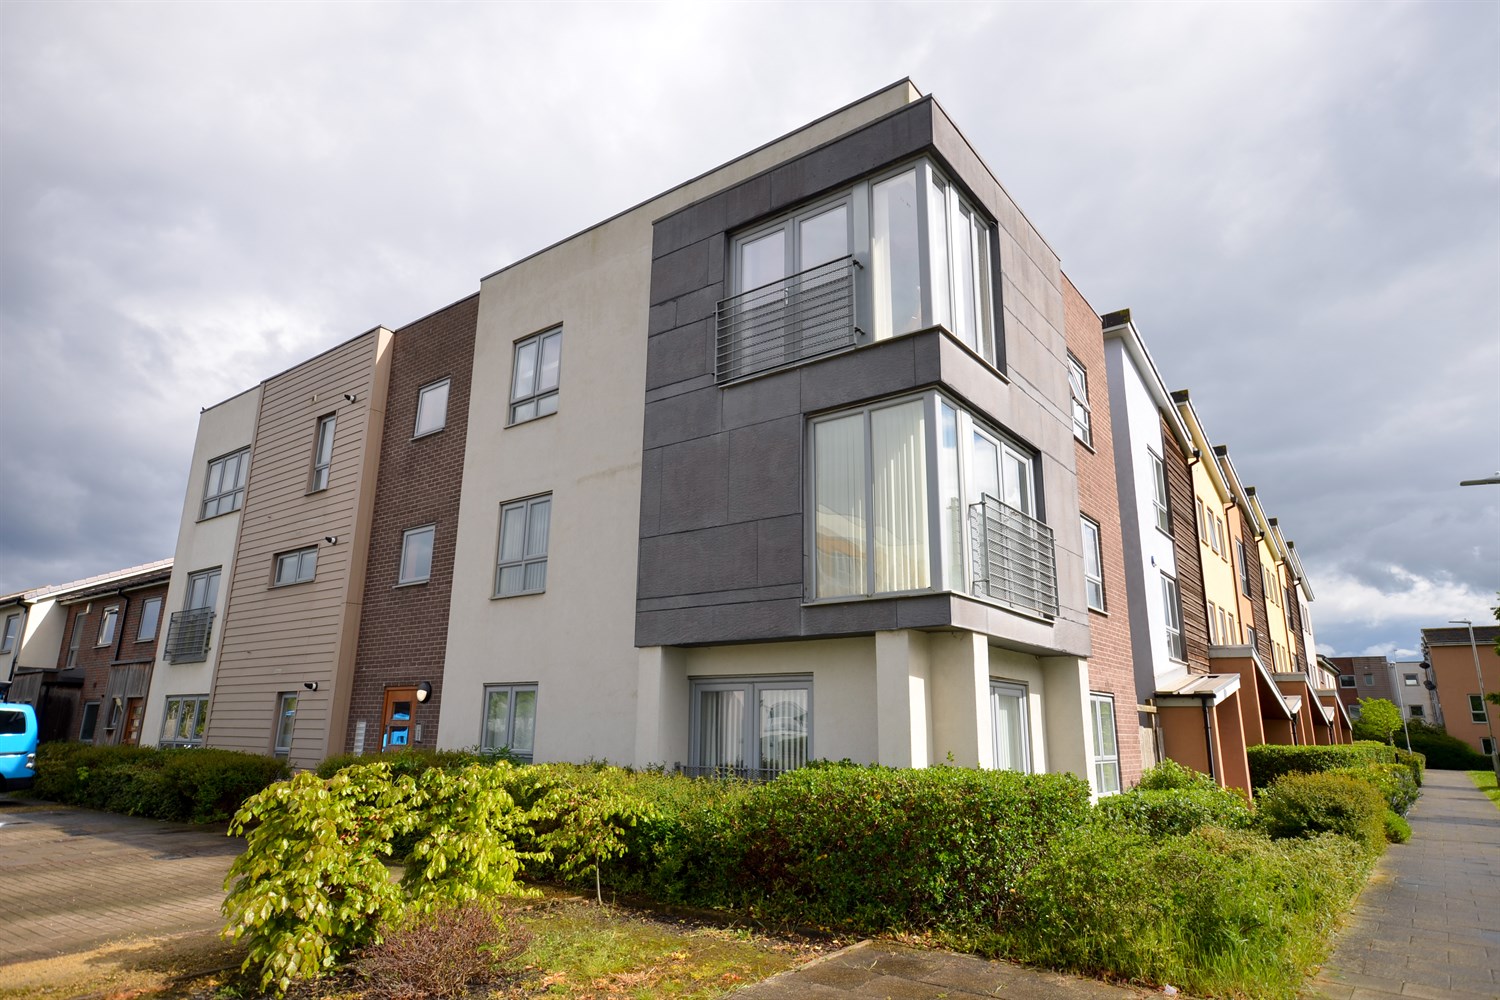 2 bed flat for sale in Northside, Gateshead - Property Image 1